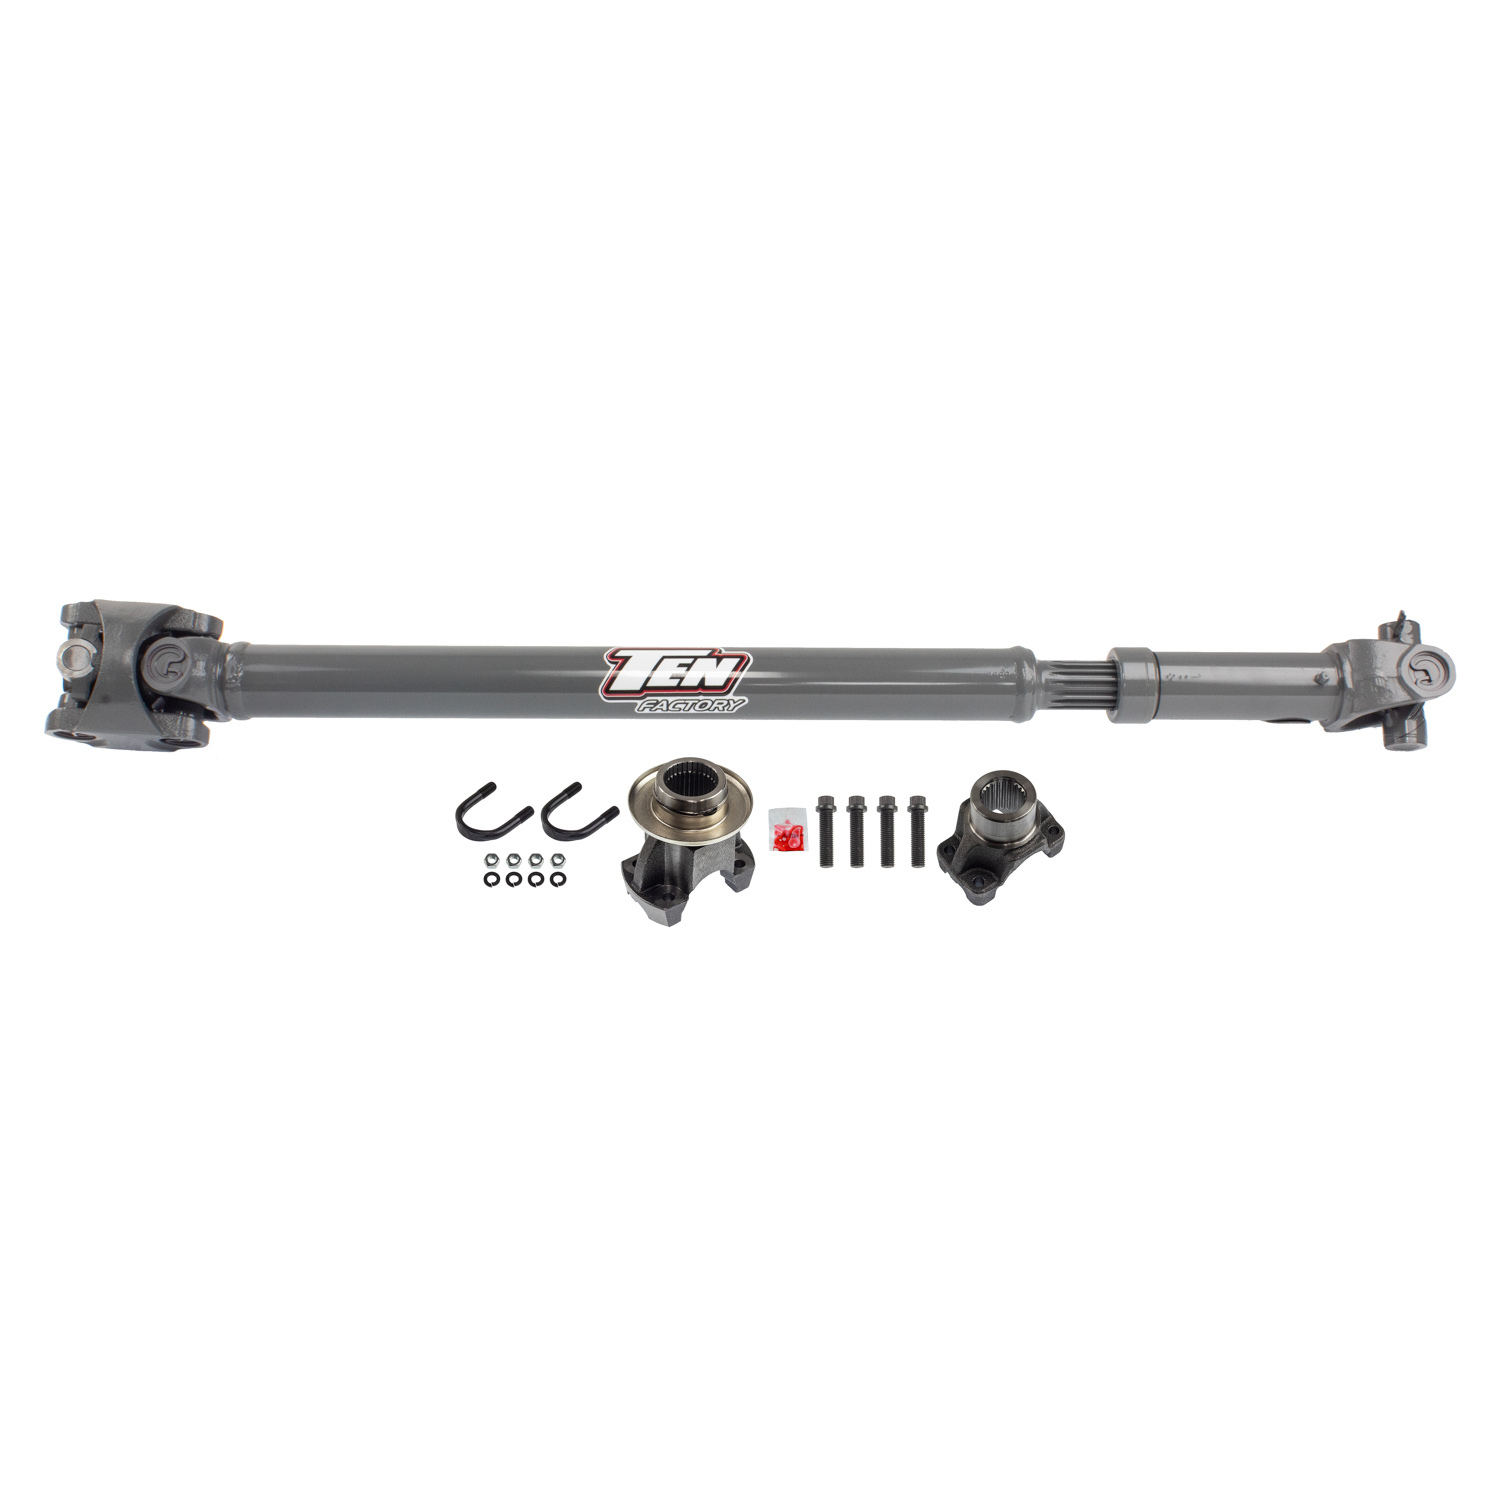 Ten Factory TFF1310-4155 Drive Shaft, Performance, 1310 U-Joints, Hardware Included, Chromoly, Gray Paint, Front, Jeep Wrangler JK 2007-17, Each